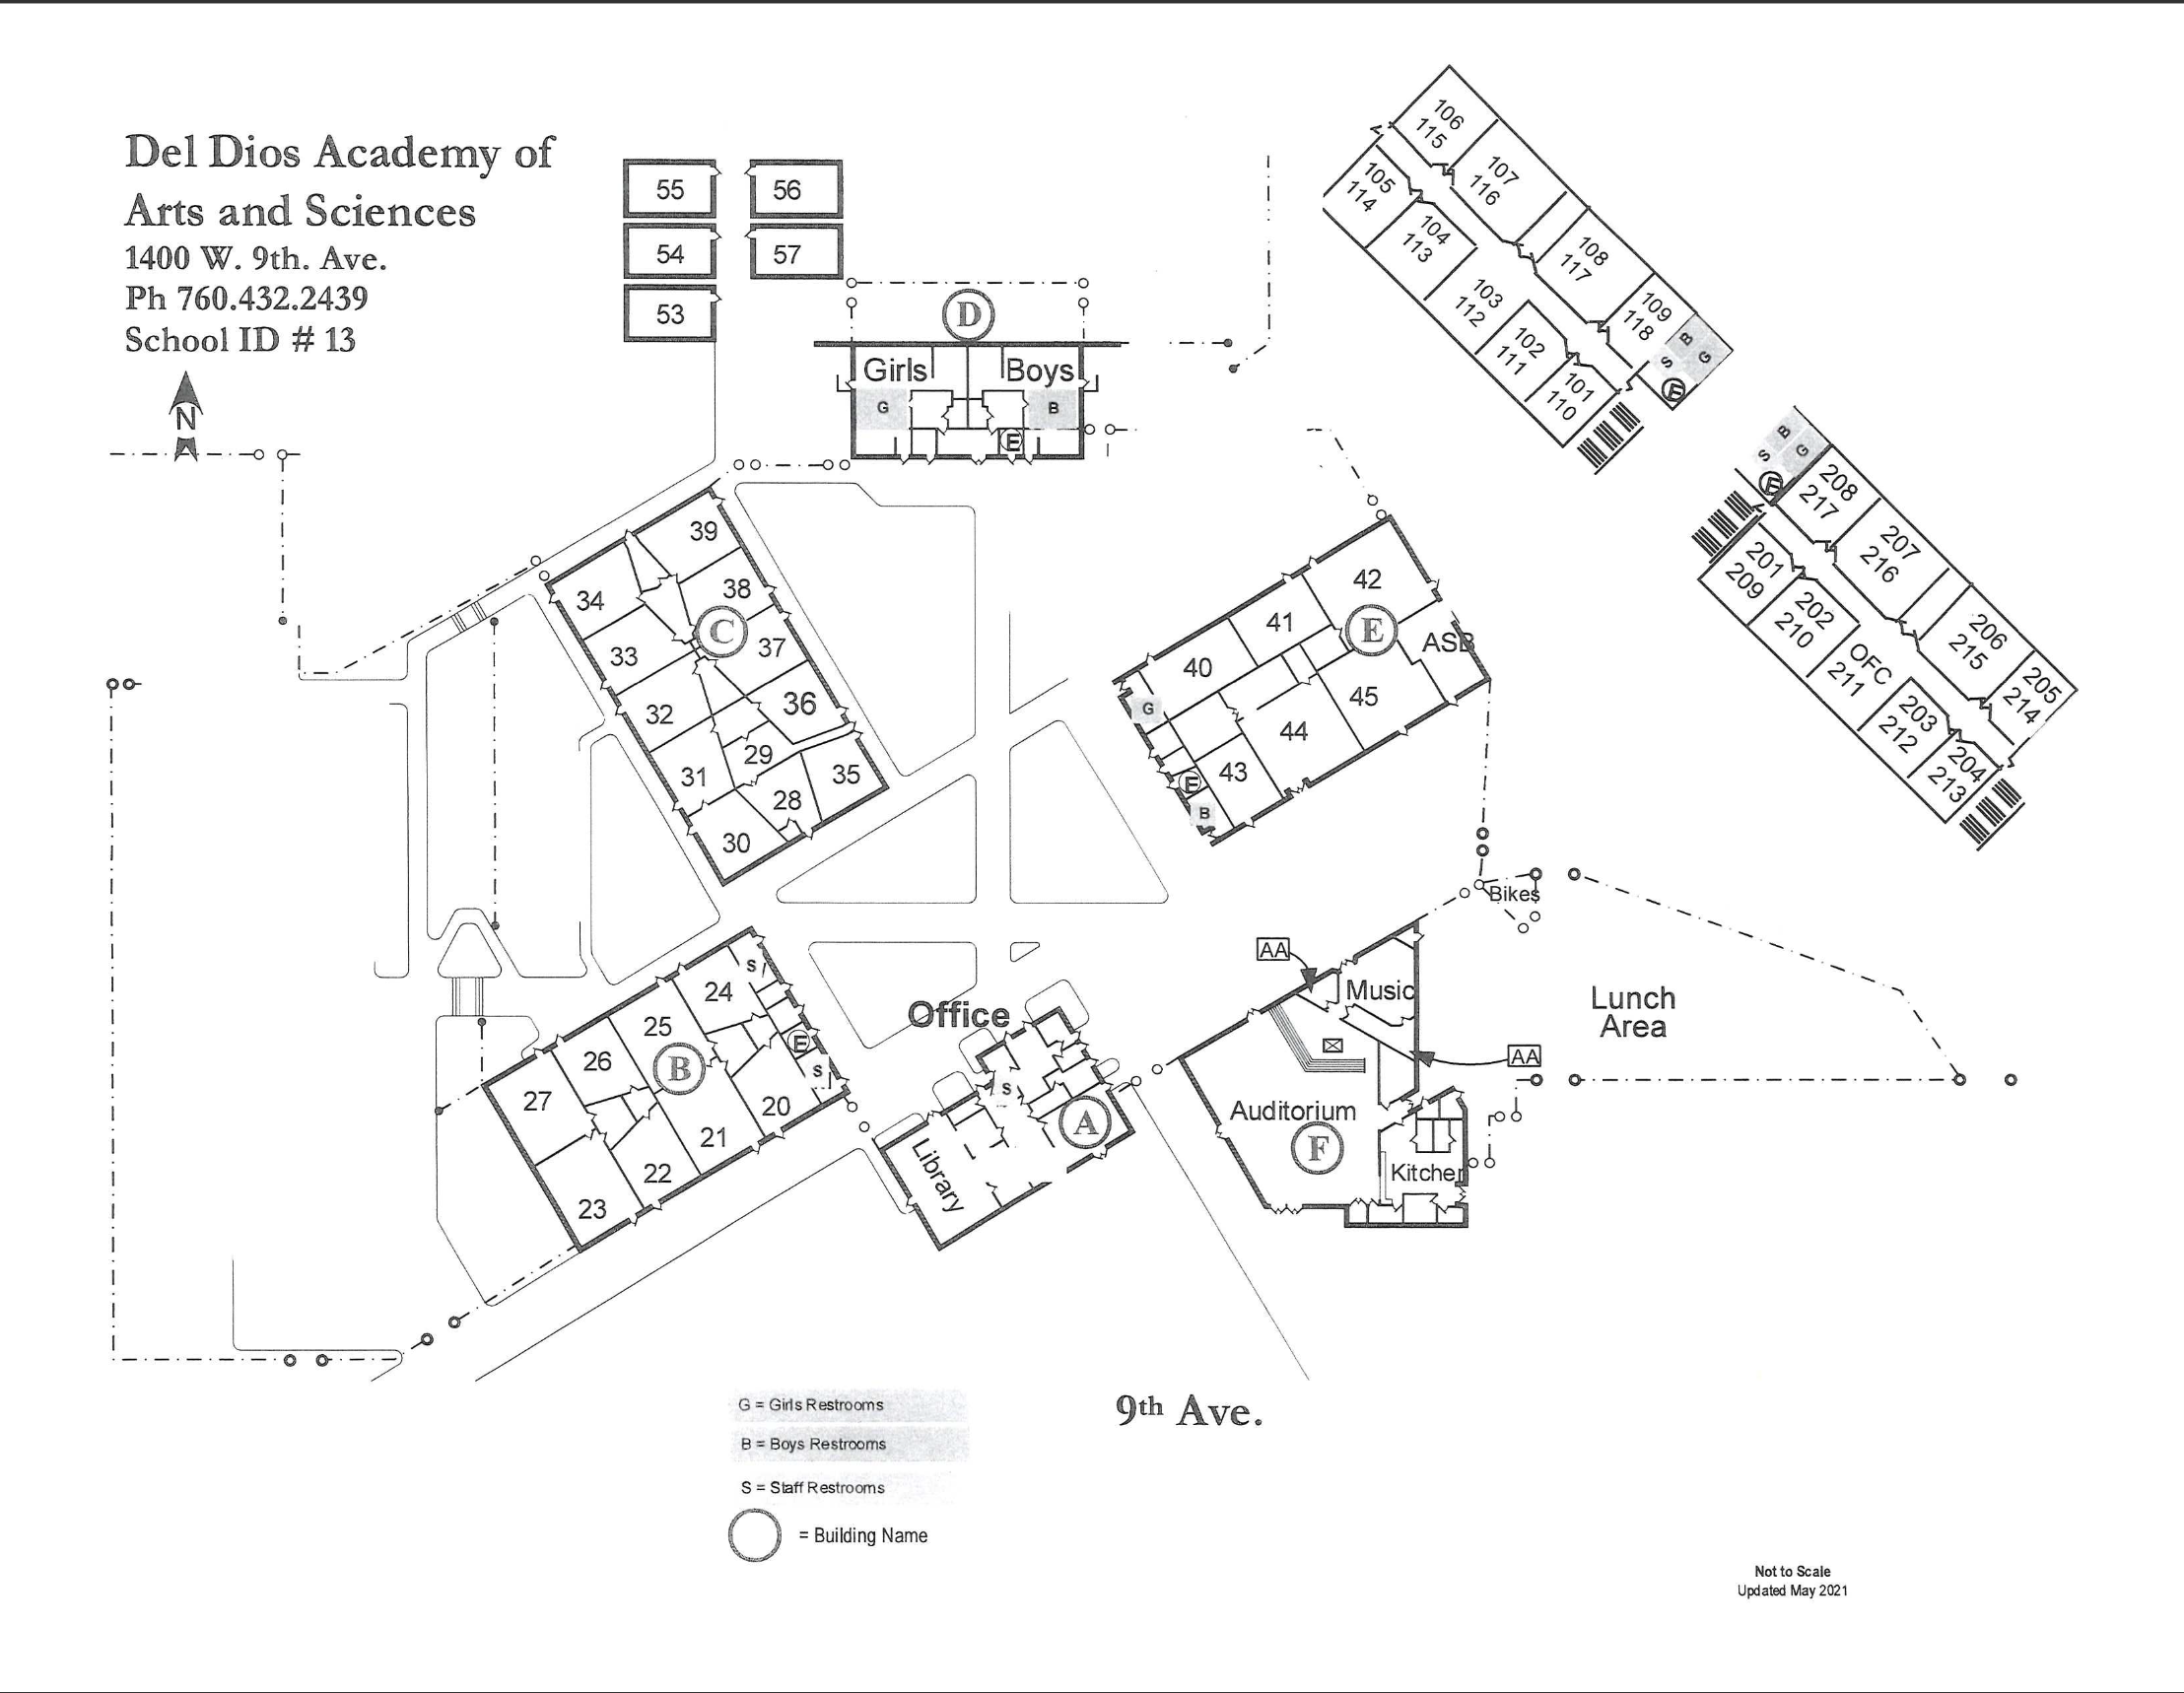 Campus map of Del Dios Academy showing map for the entire campus including the STEM and new VAPA building.